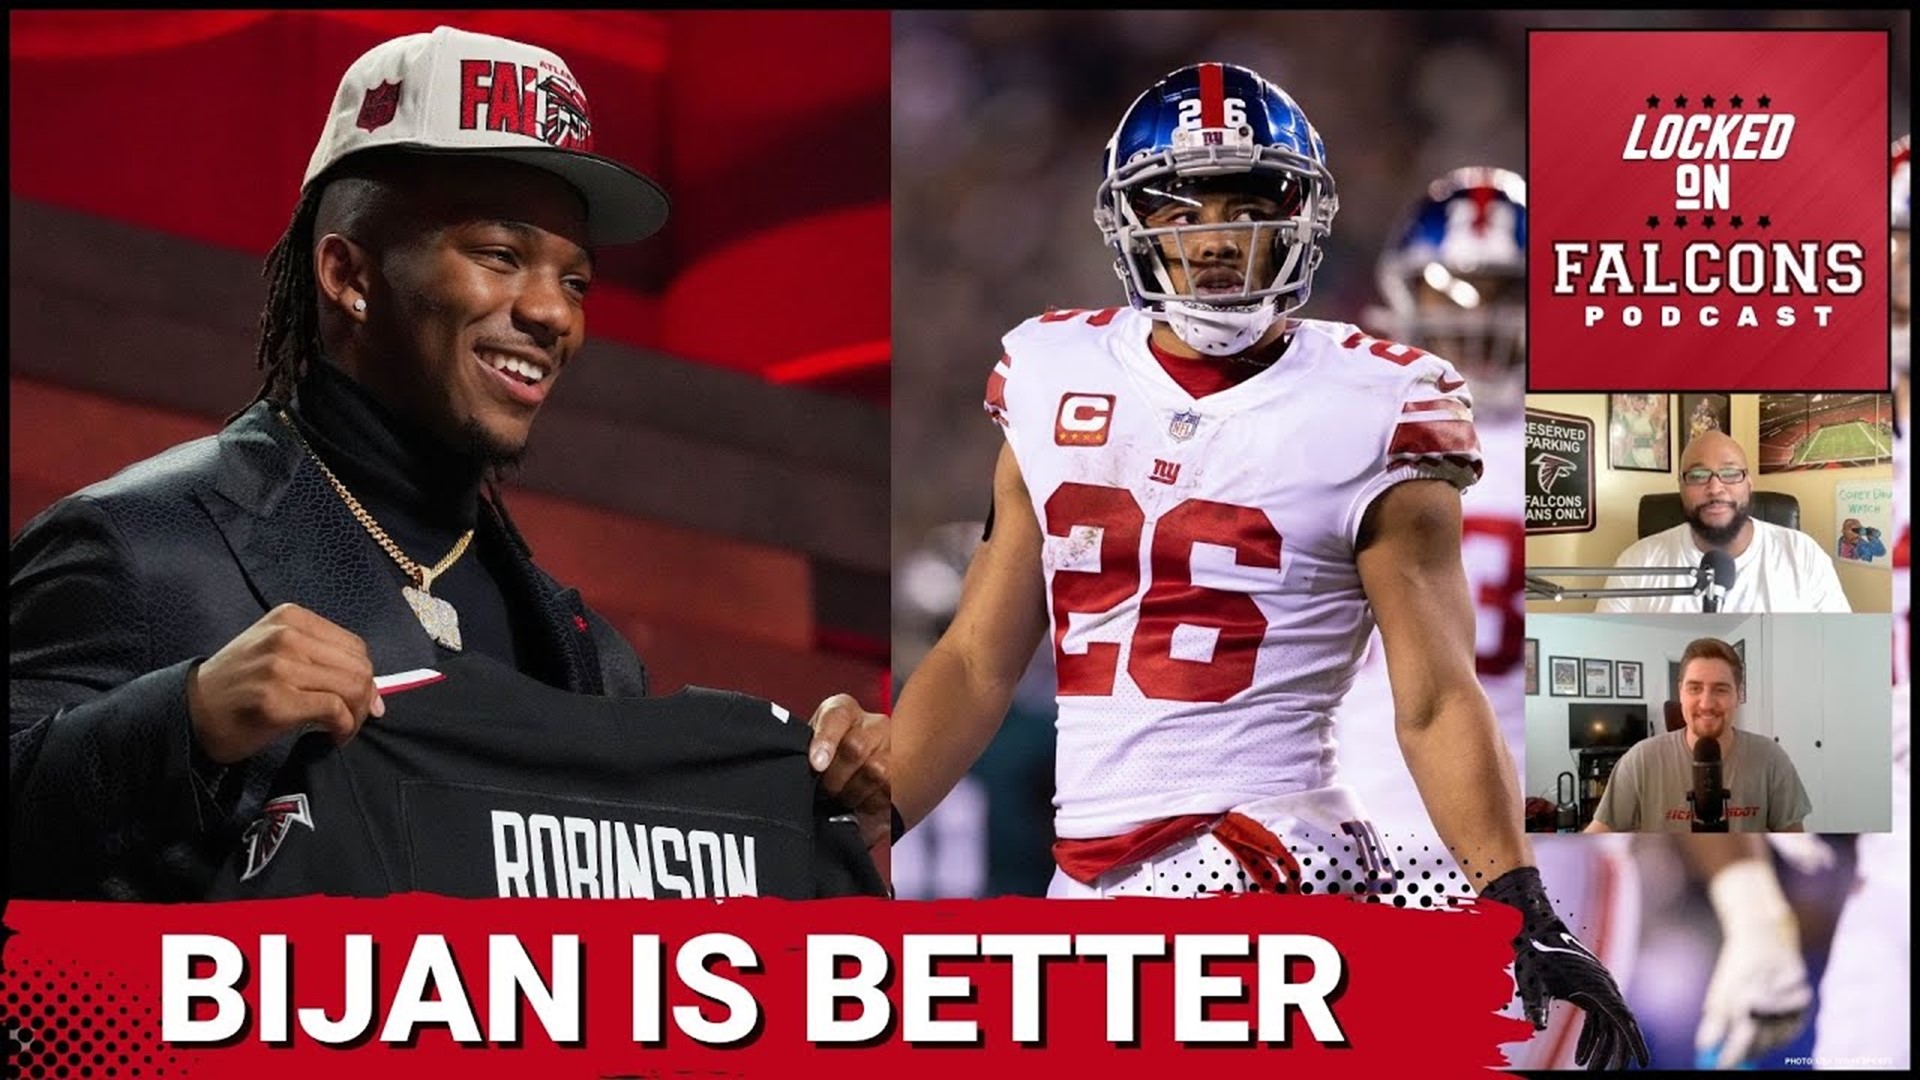 Bijan Robinson is a complete running back that is better than Saquon Barkley